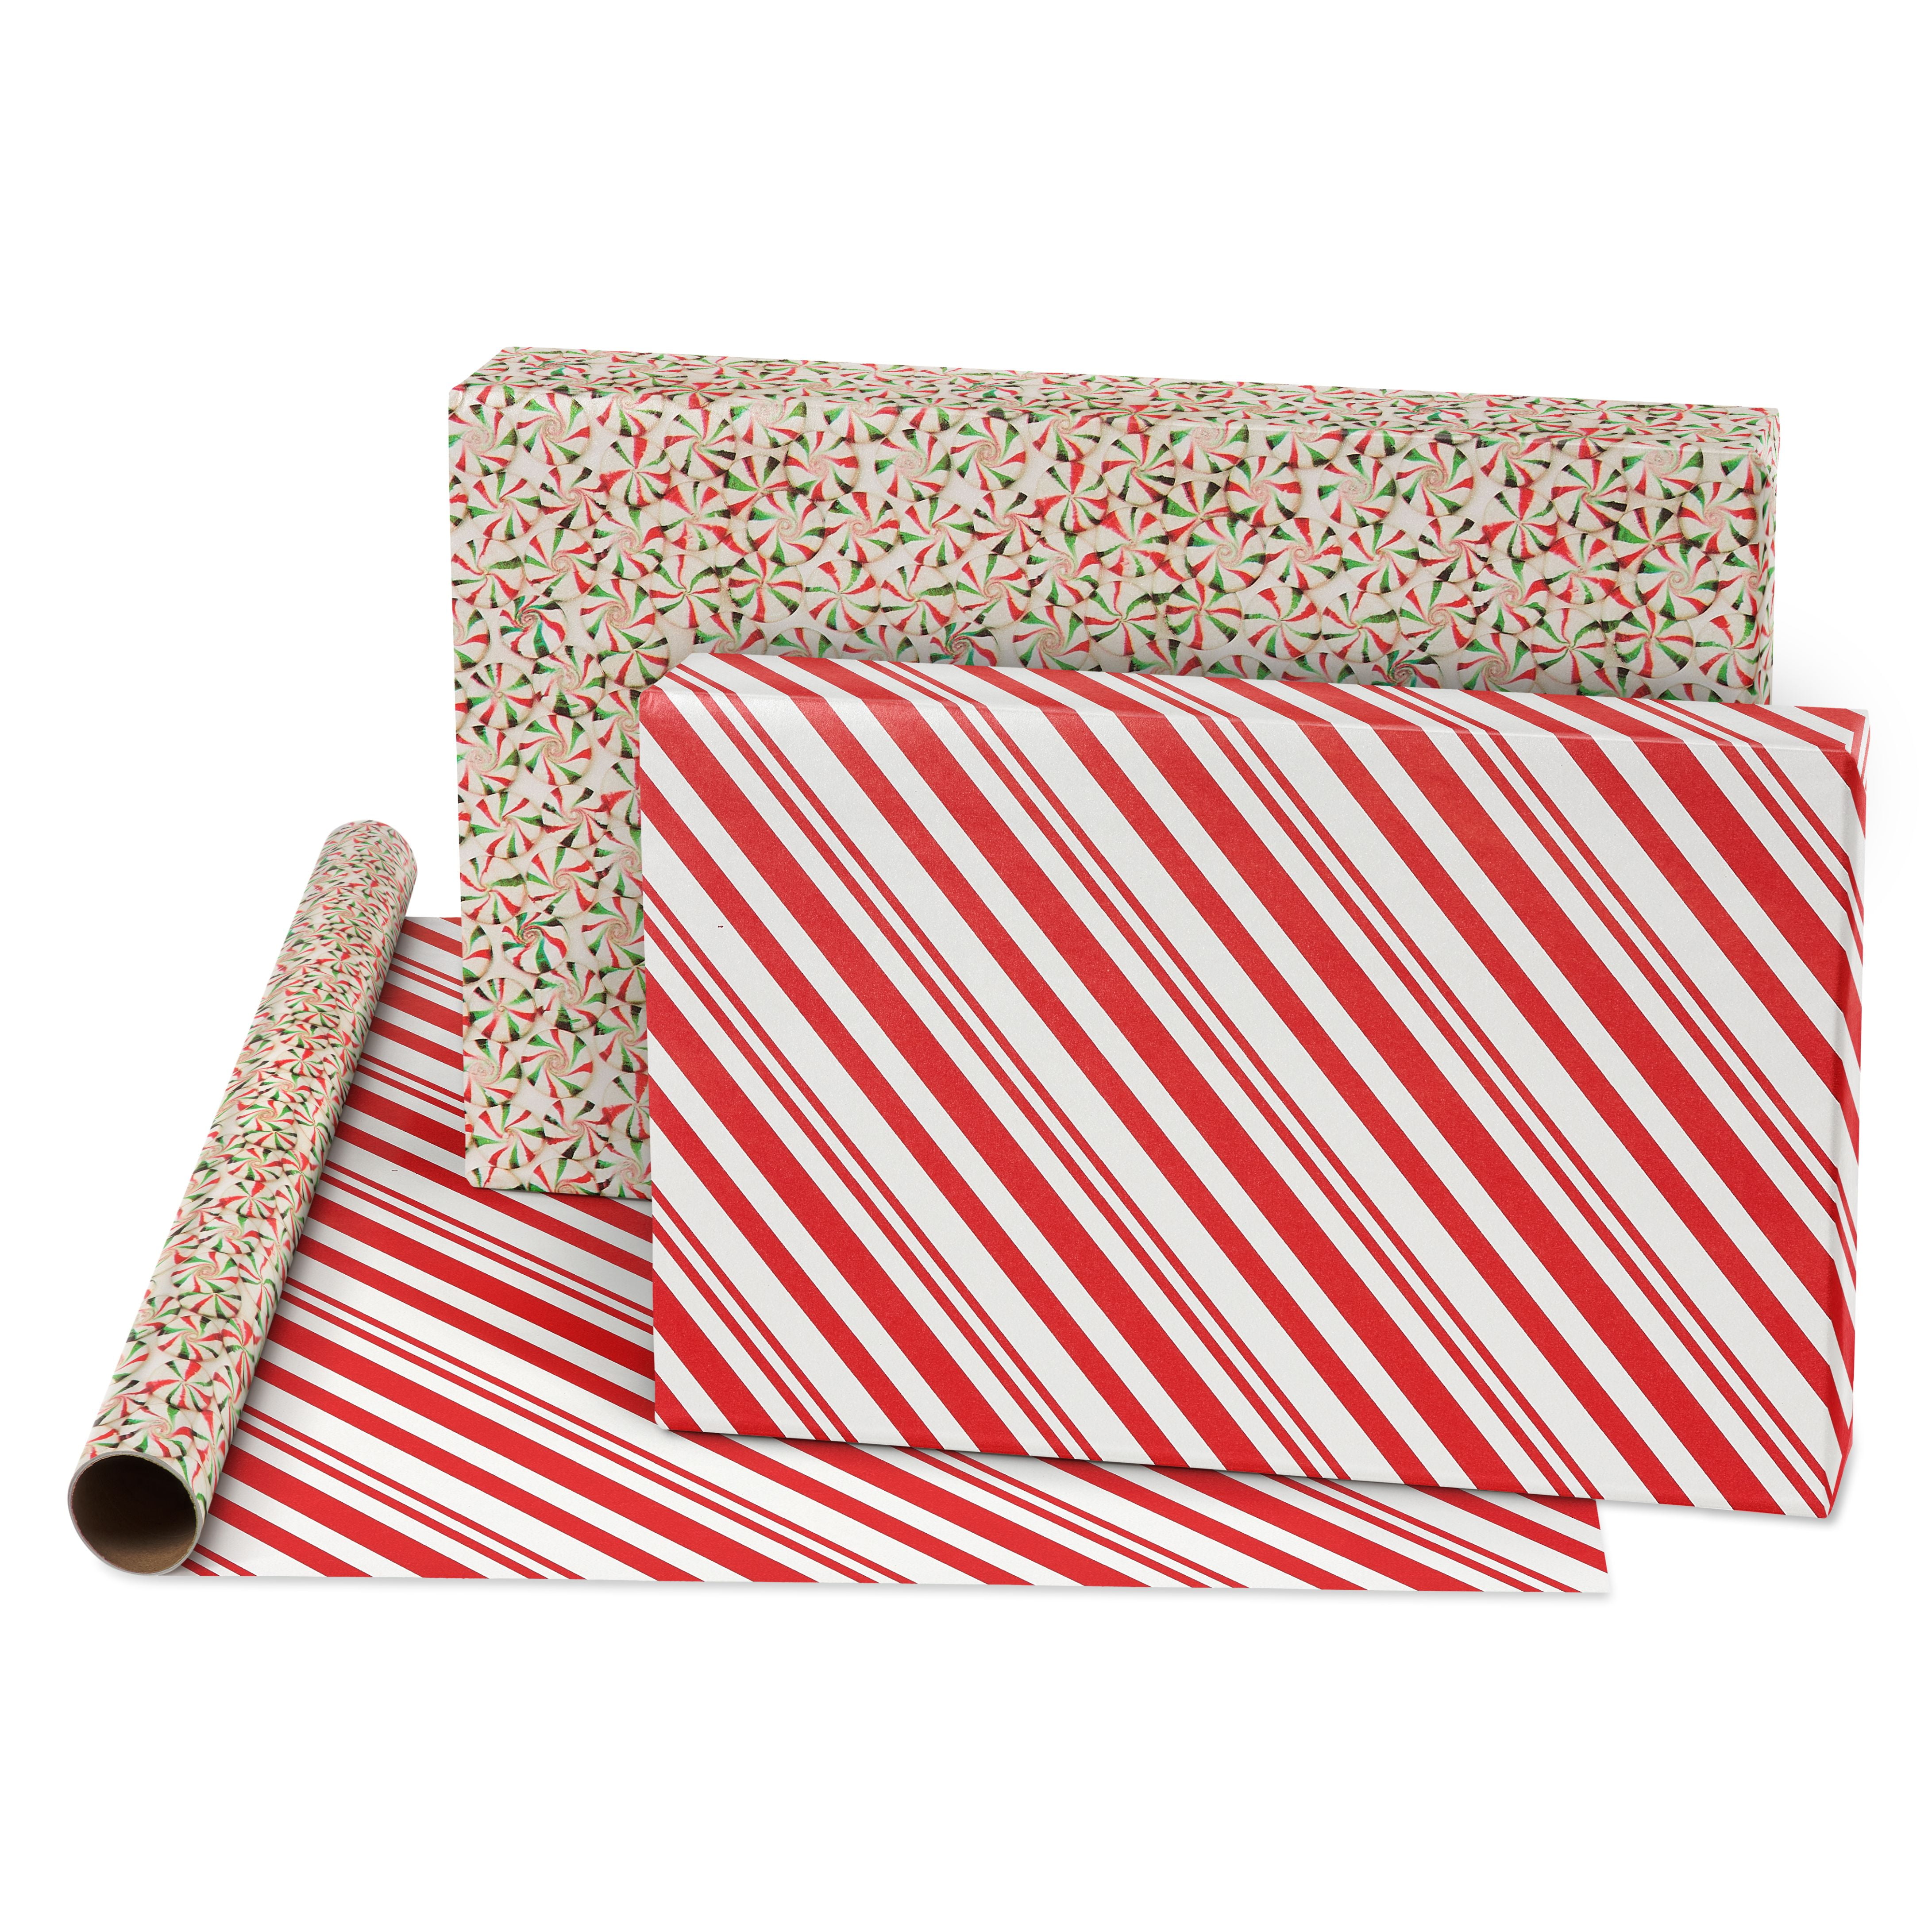 American Greetings Christmas Wrapping Paper, Gingerbread, Ornaments,  Peppermints (3 Pack, 120 sq. ft.)